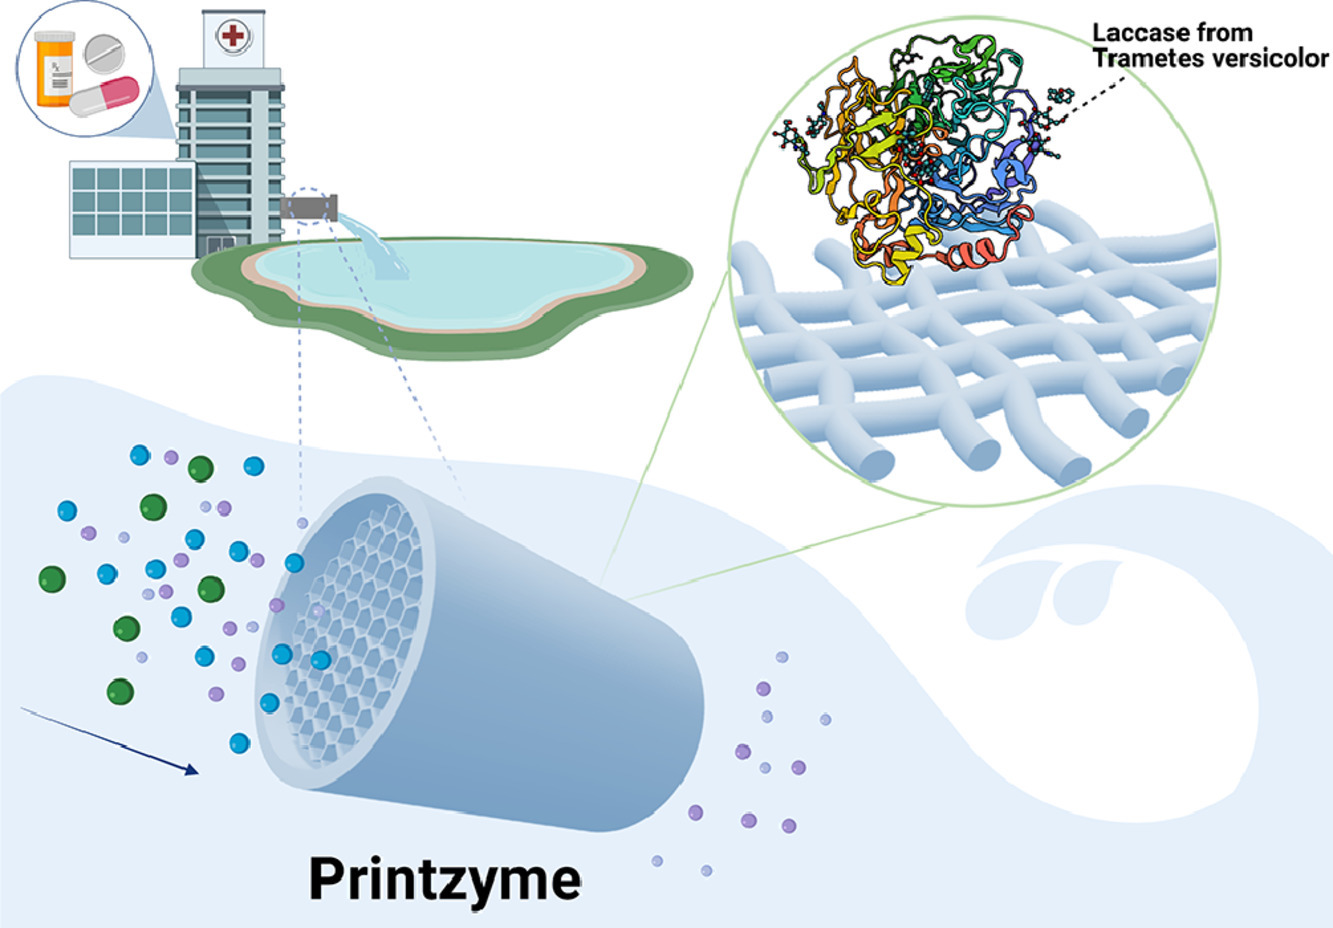 The researcher's Printzyme device can remove pharmaceutical drugs from water. Image via the Water Research journal.